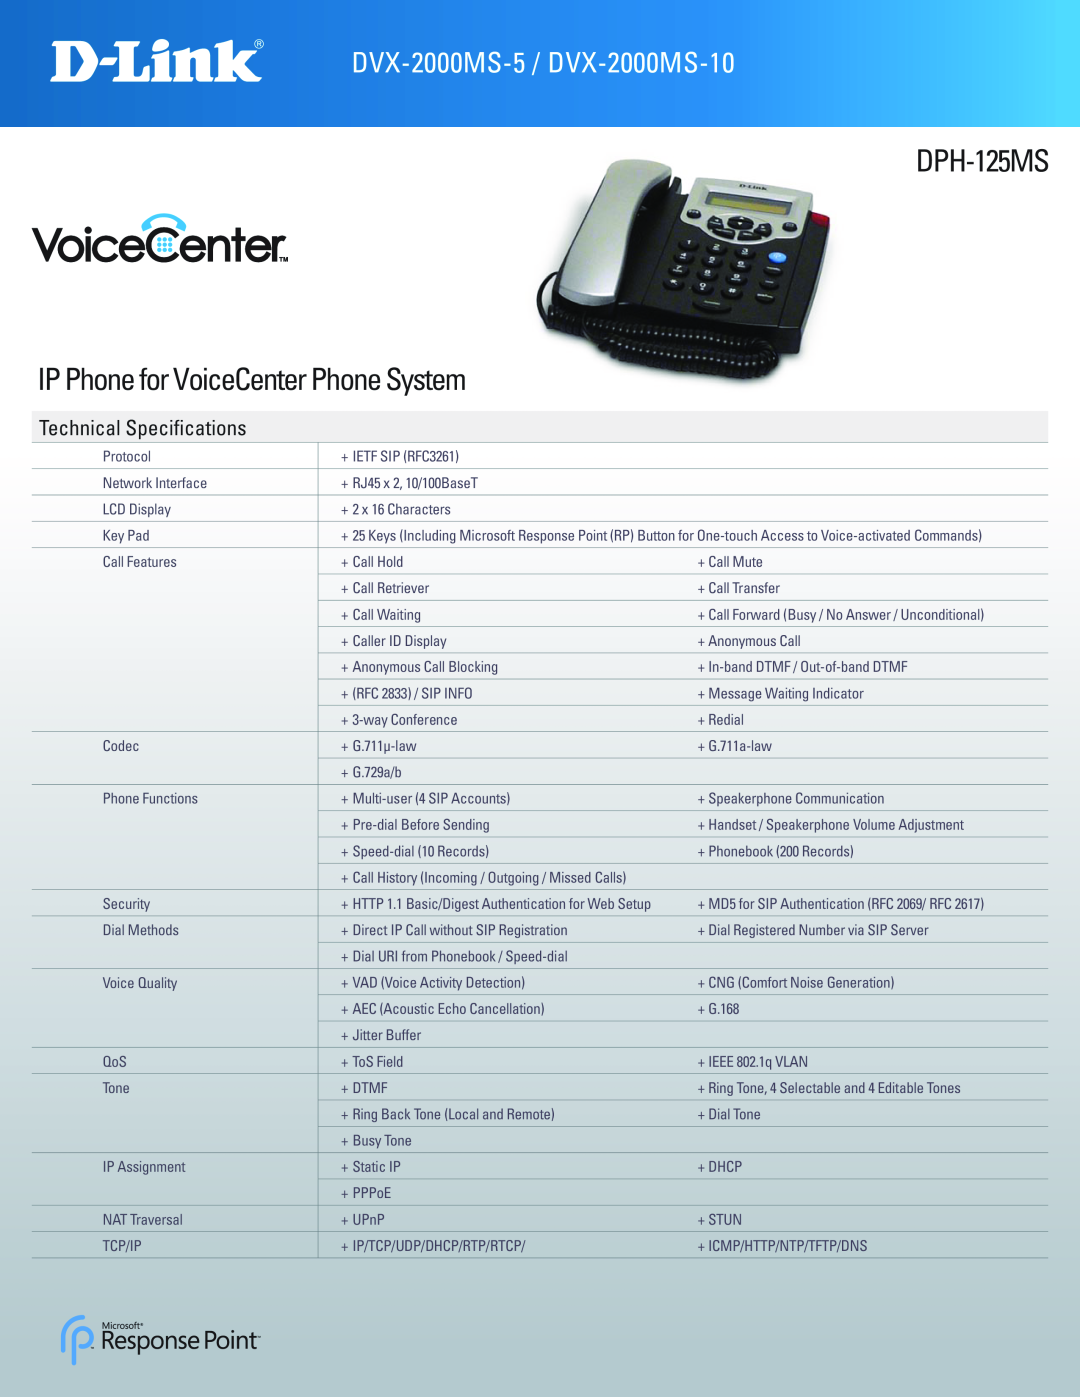 D-Link manual DPH-125MS IP Phone for VoiceCenter Phone System, DVX-2000MS-5 / DVX-2000MS-10, Technical Specifications 